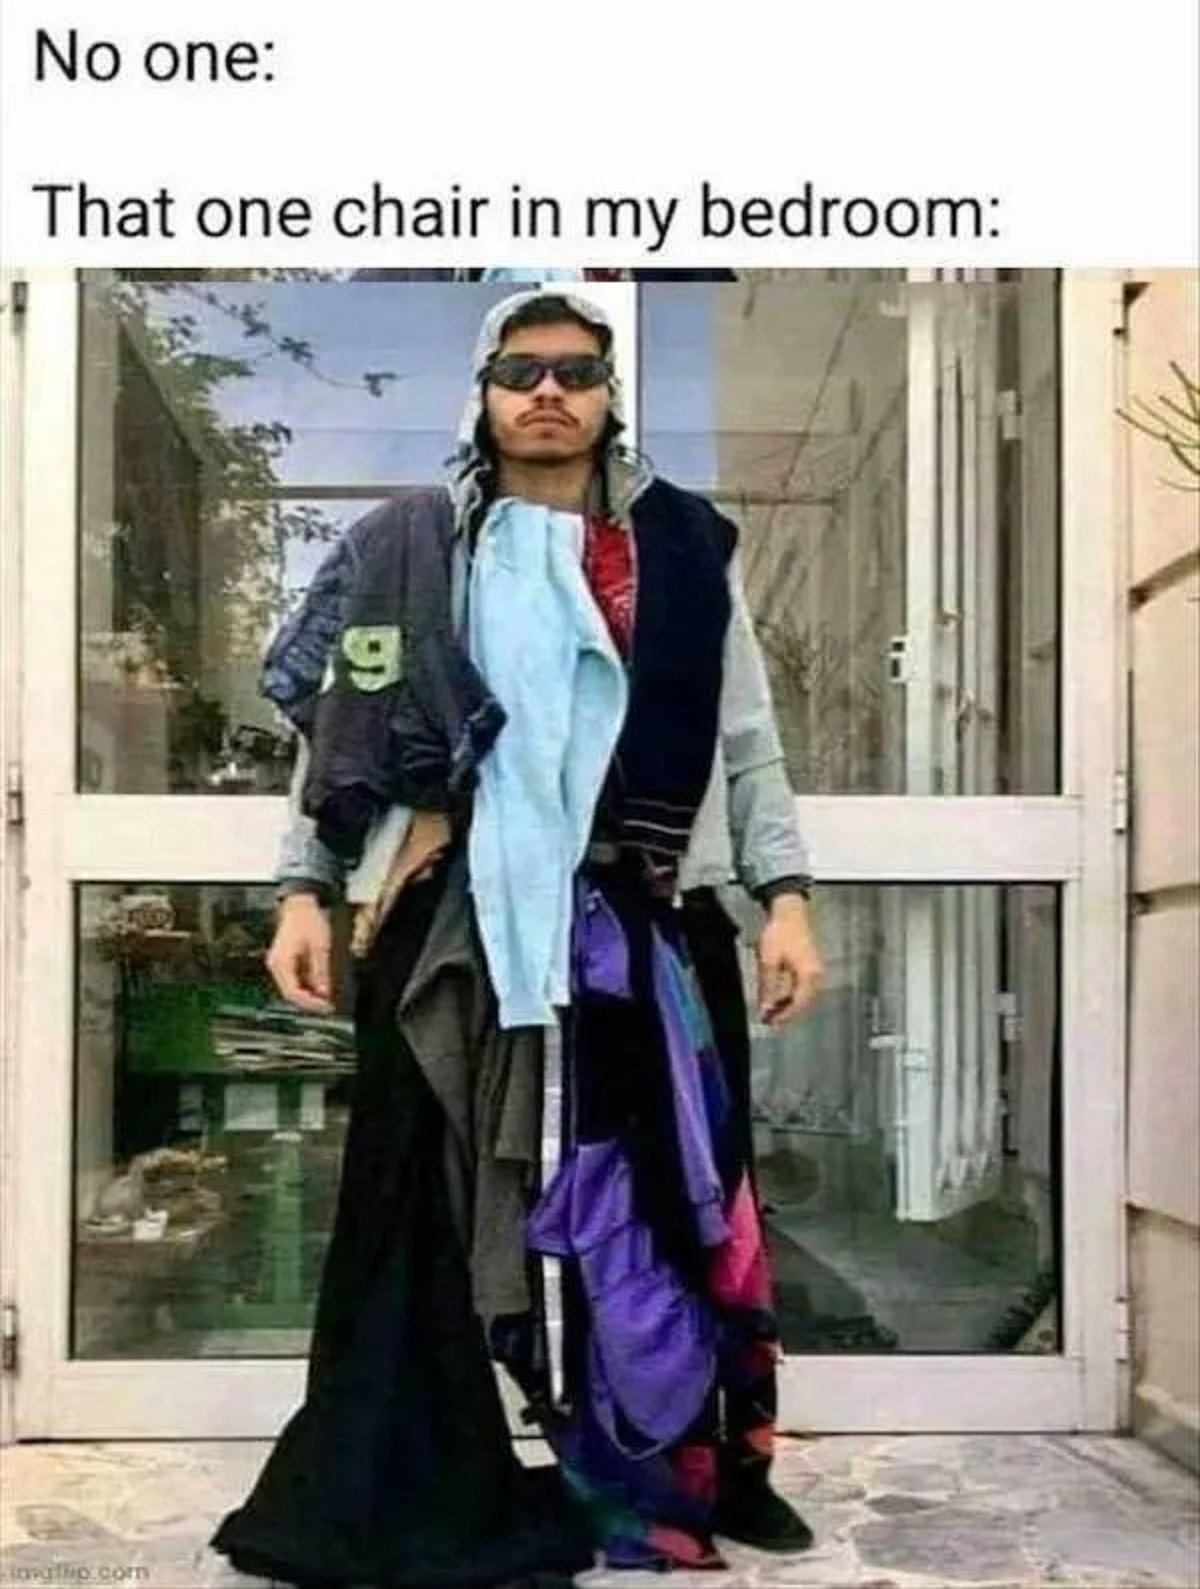 cosplay - No one That one chair in my bedroom imvaflip.com g